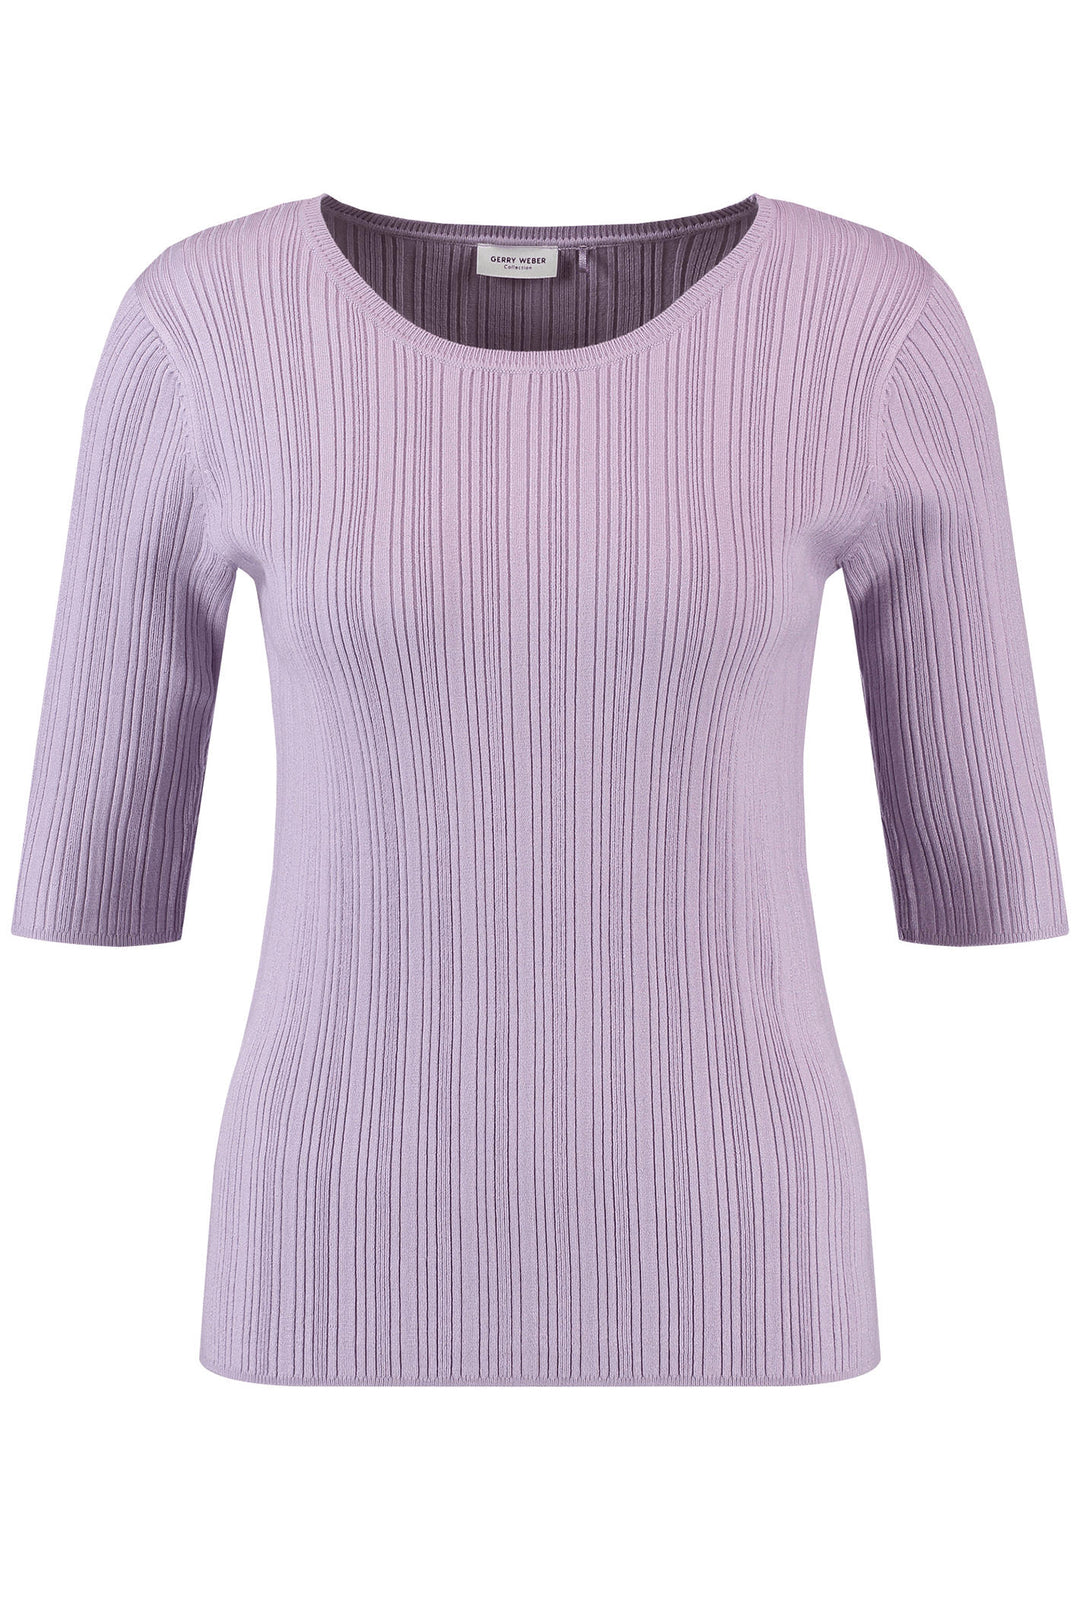 Gerry Weber 978018 Soft Lavender Ribbed Knit Top - Experience Boutique